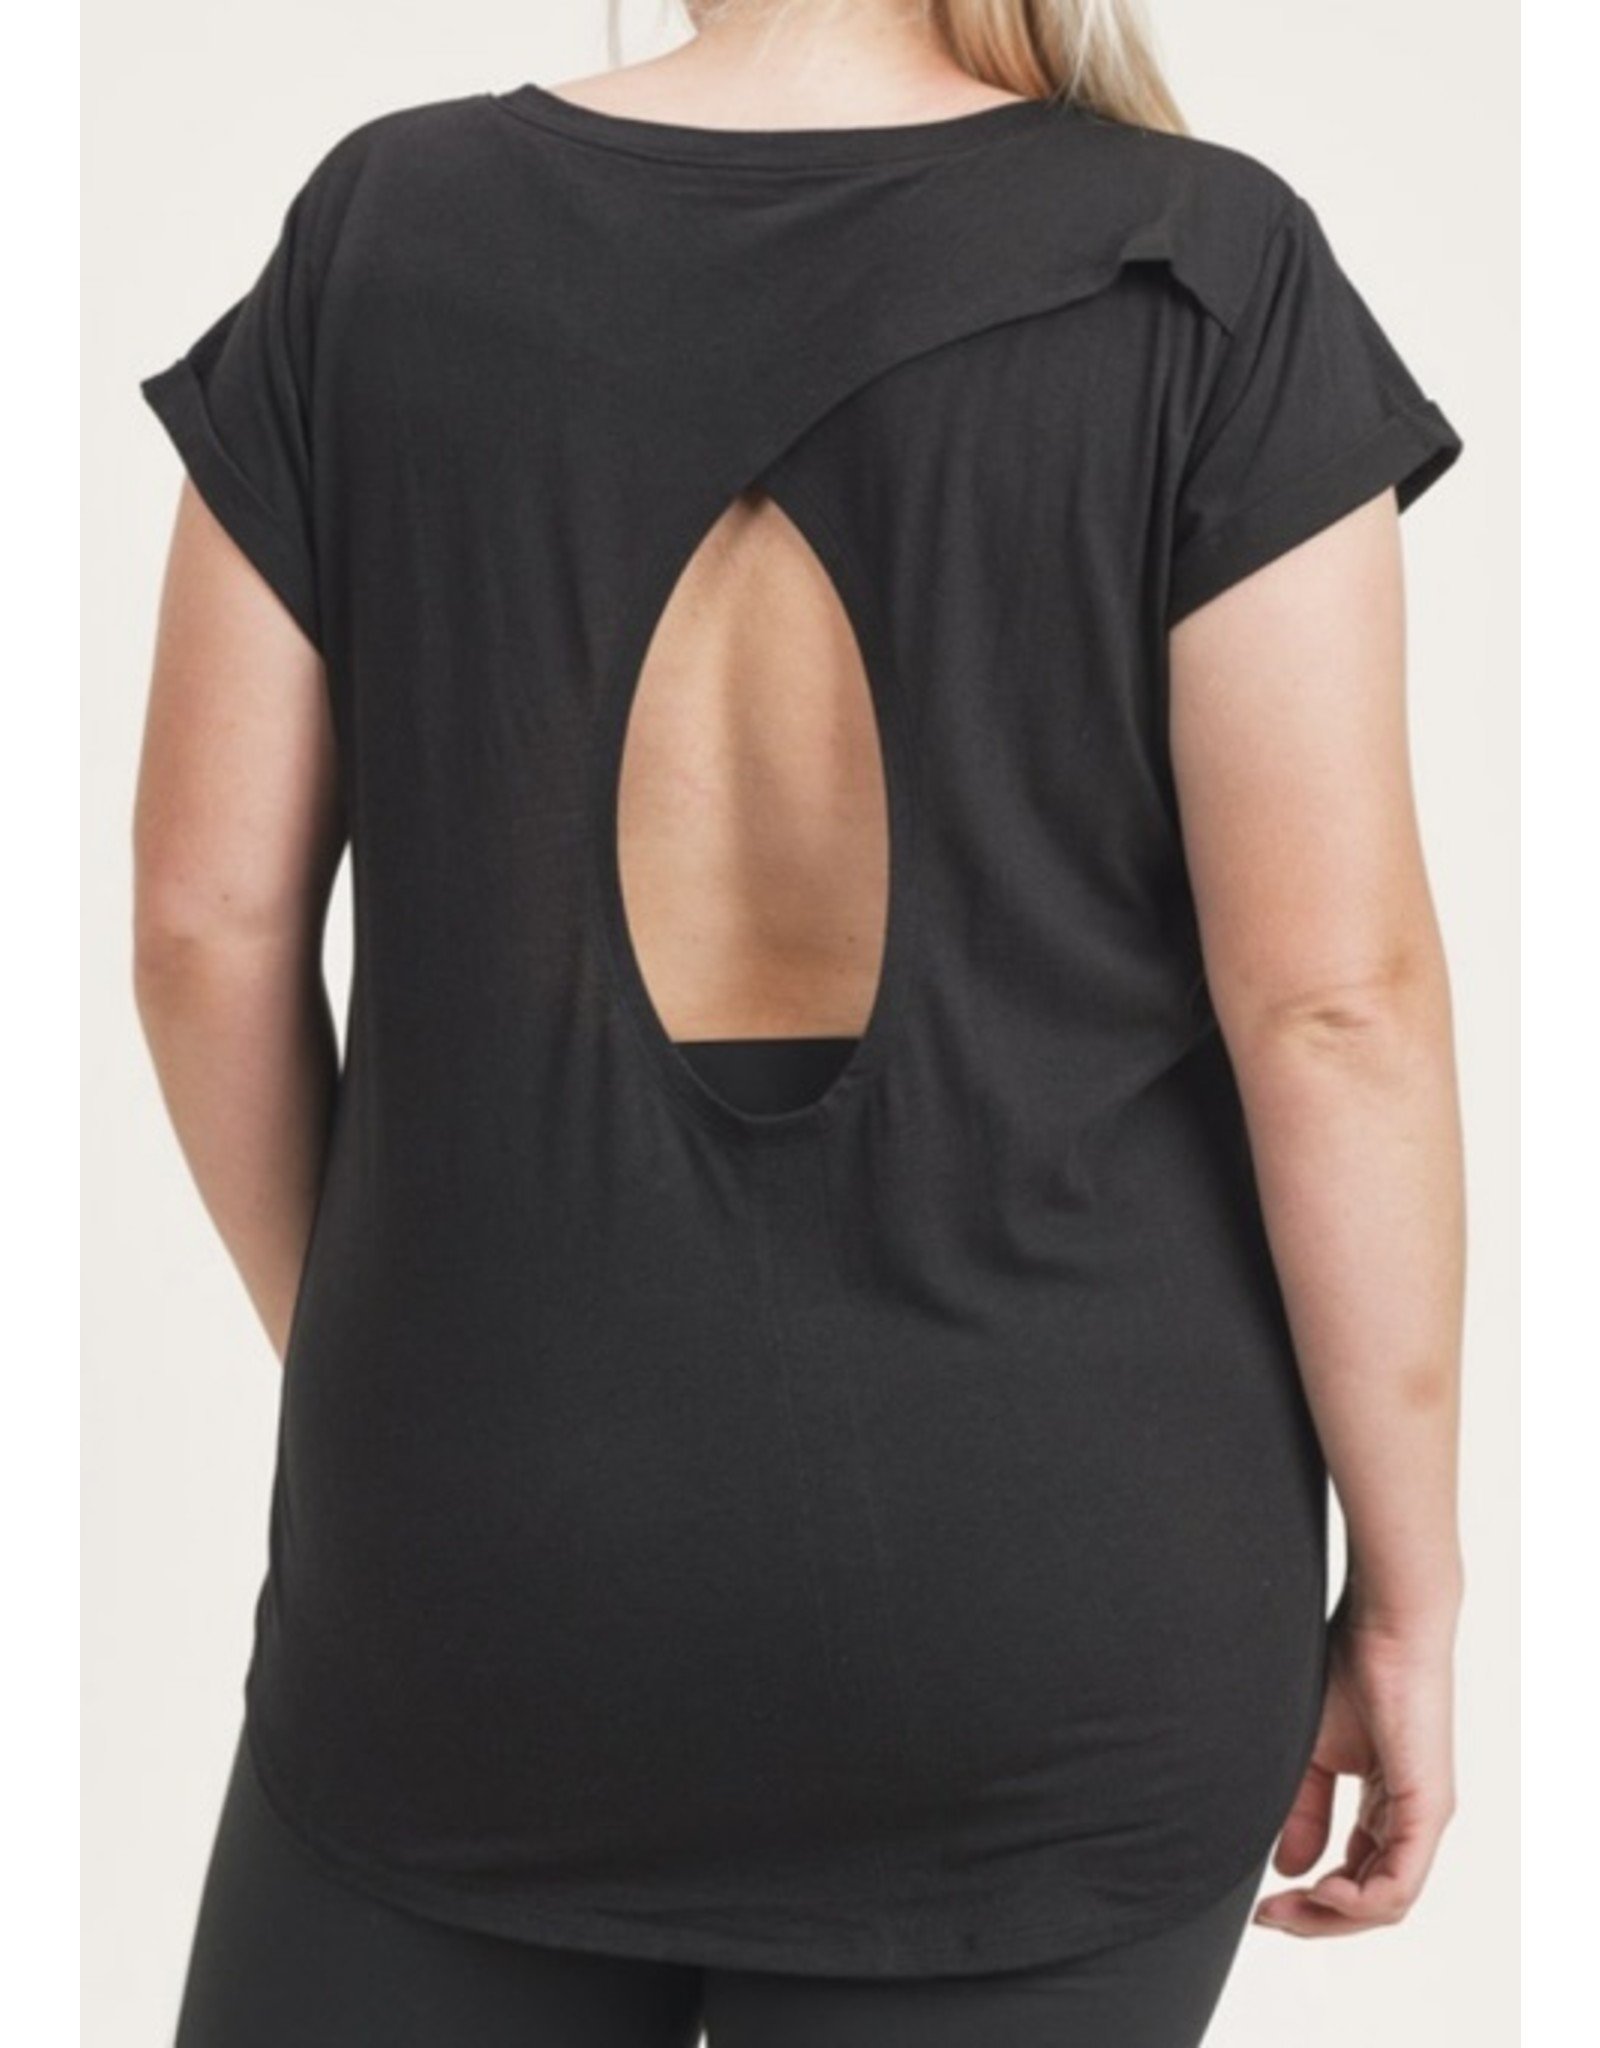 LATA Plus Overlay Cut-Out Back Top